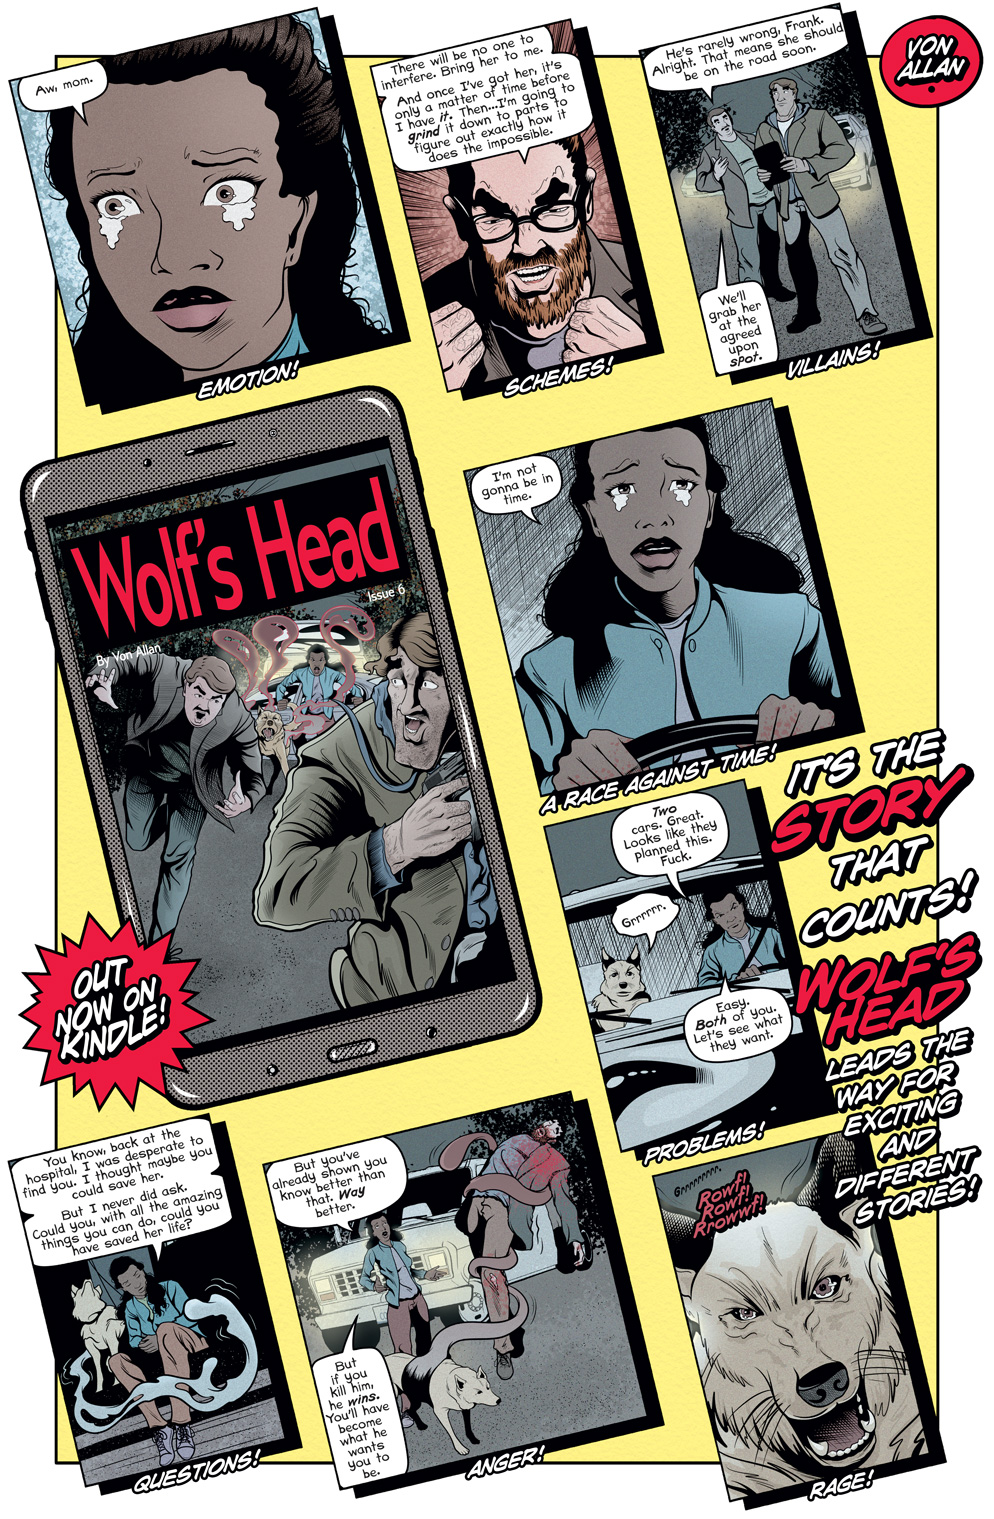 Teaser image of Wolf's Head issue 6 on Kindle